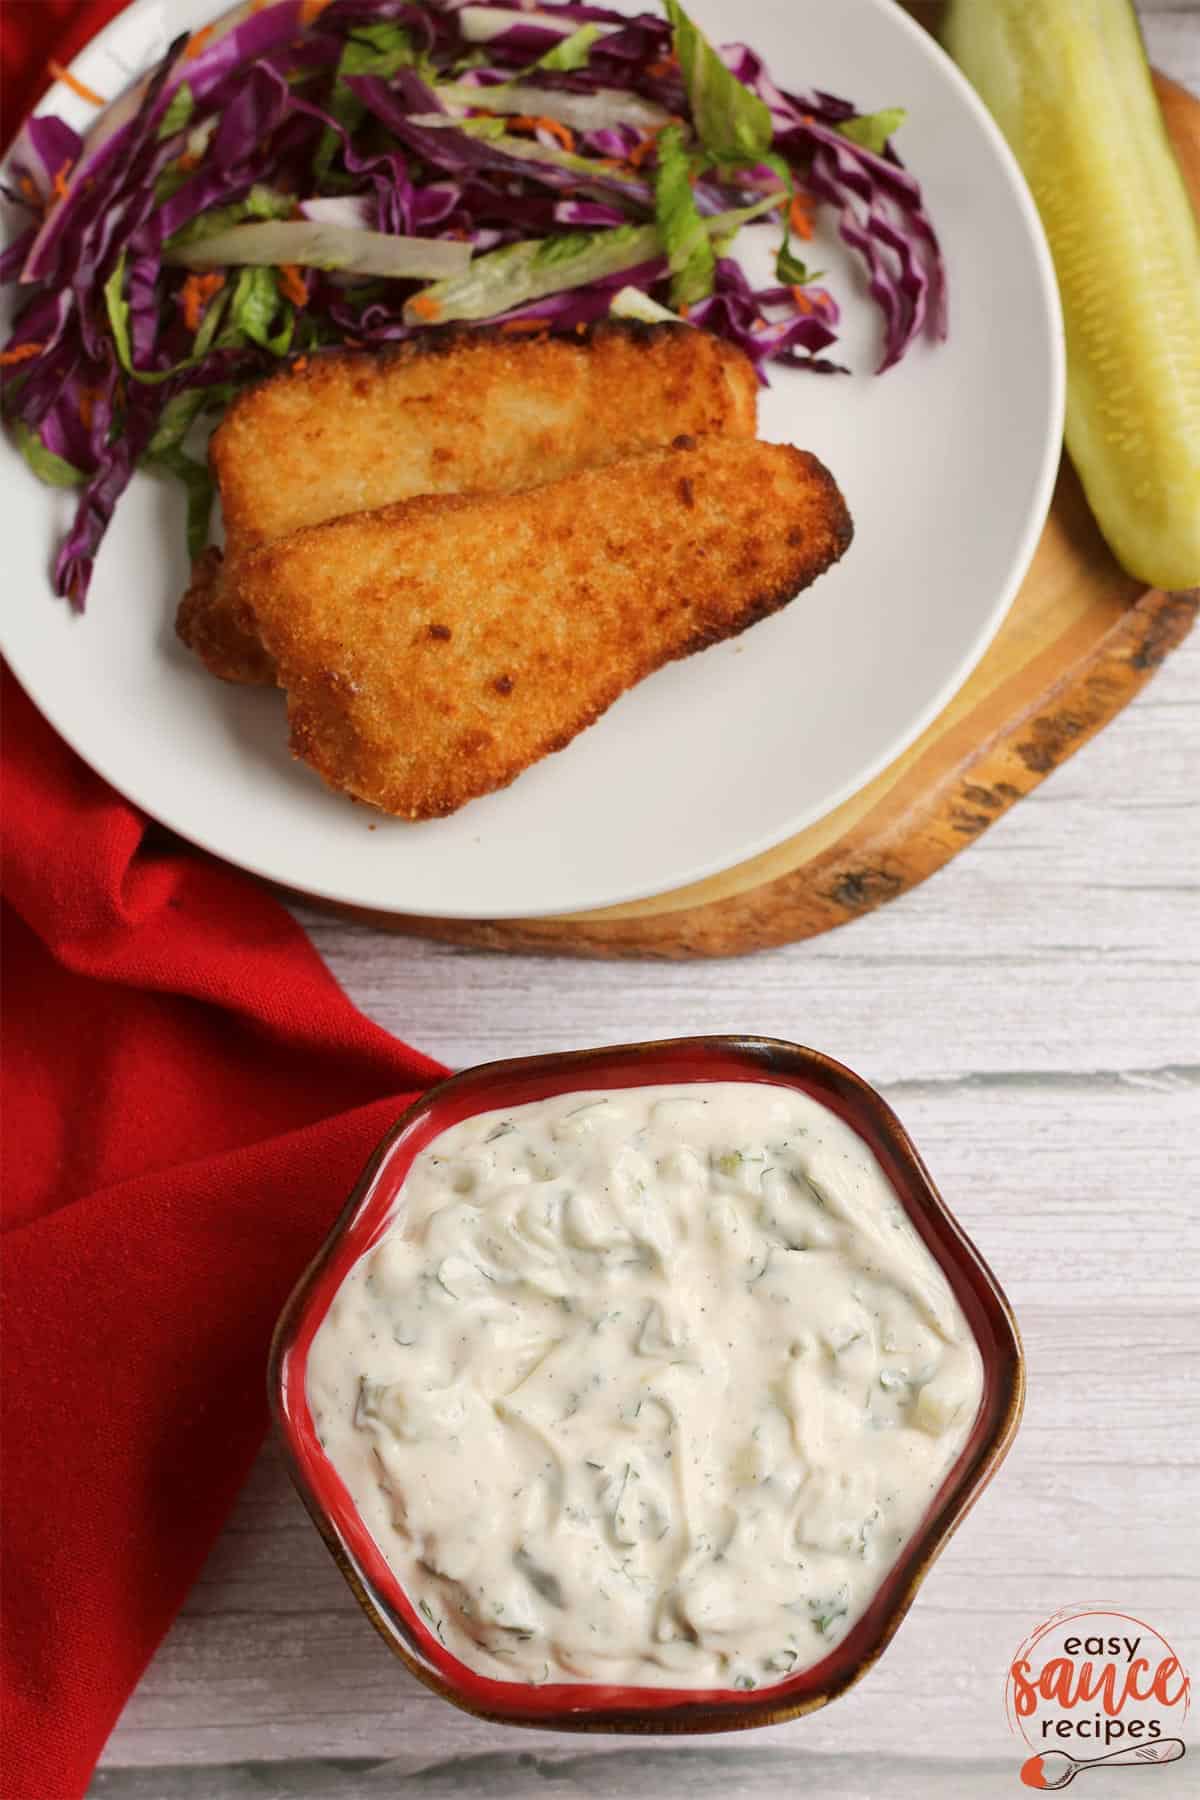 tartar sauce in a red bowl next to a plate of fried fish